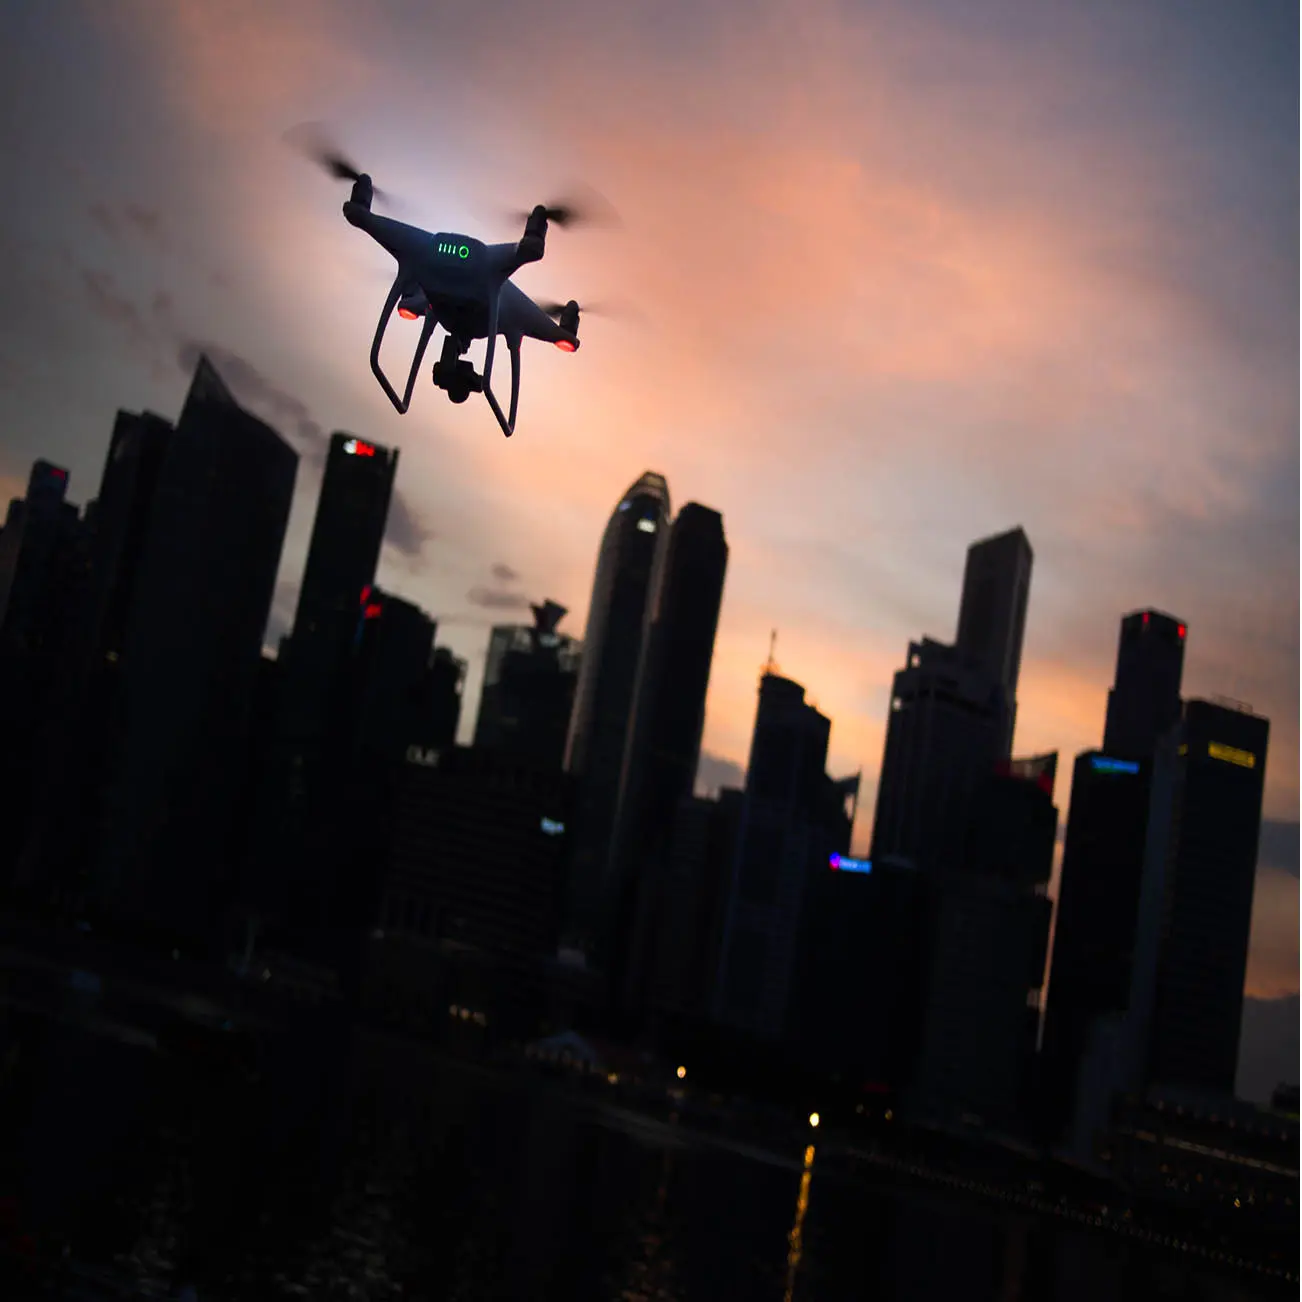 drone flying over city buildings